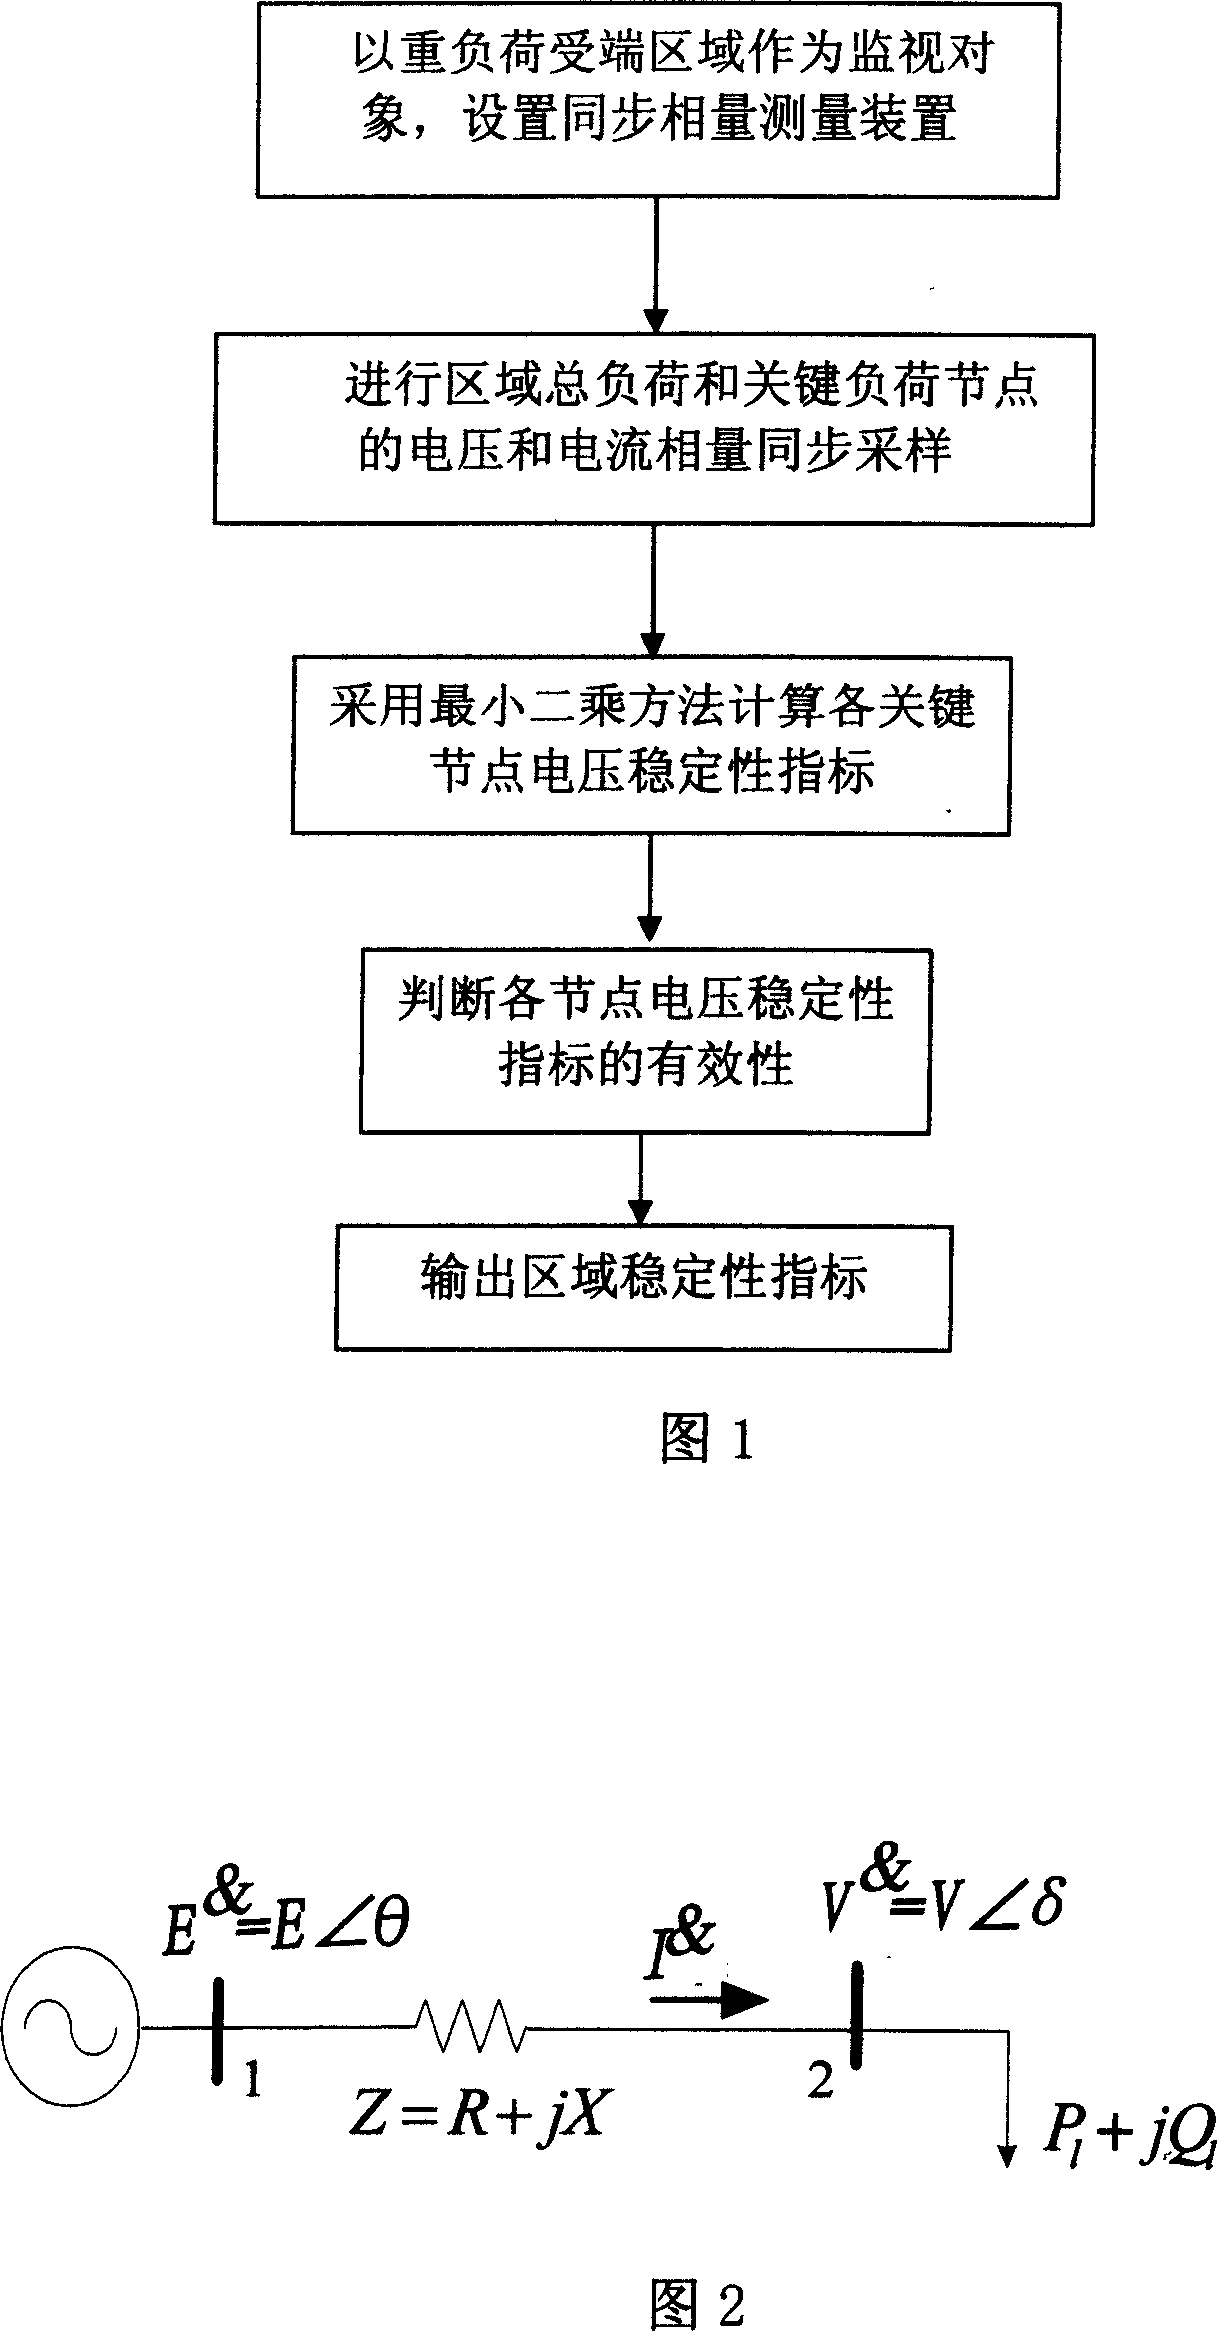 Area voltage stability monitoring method based on synchronous phasor measurement